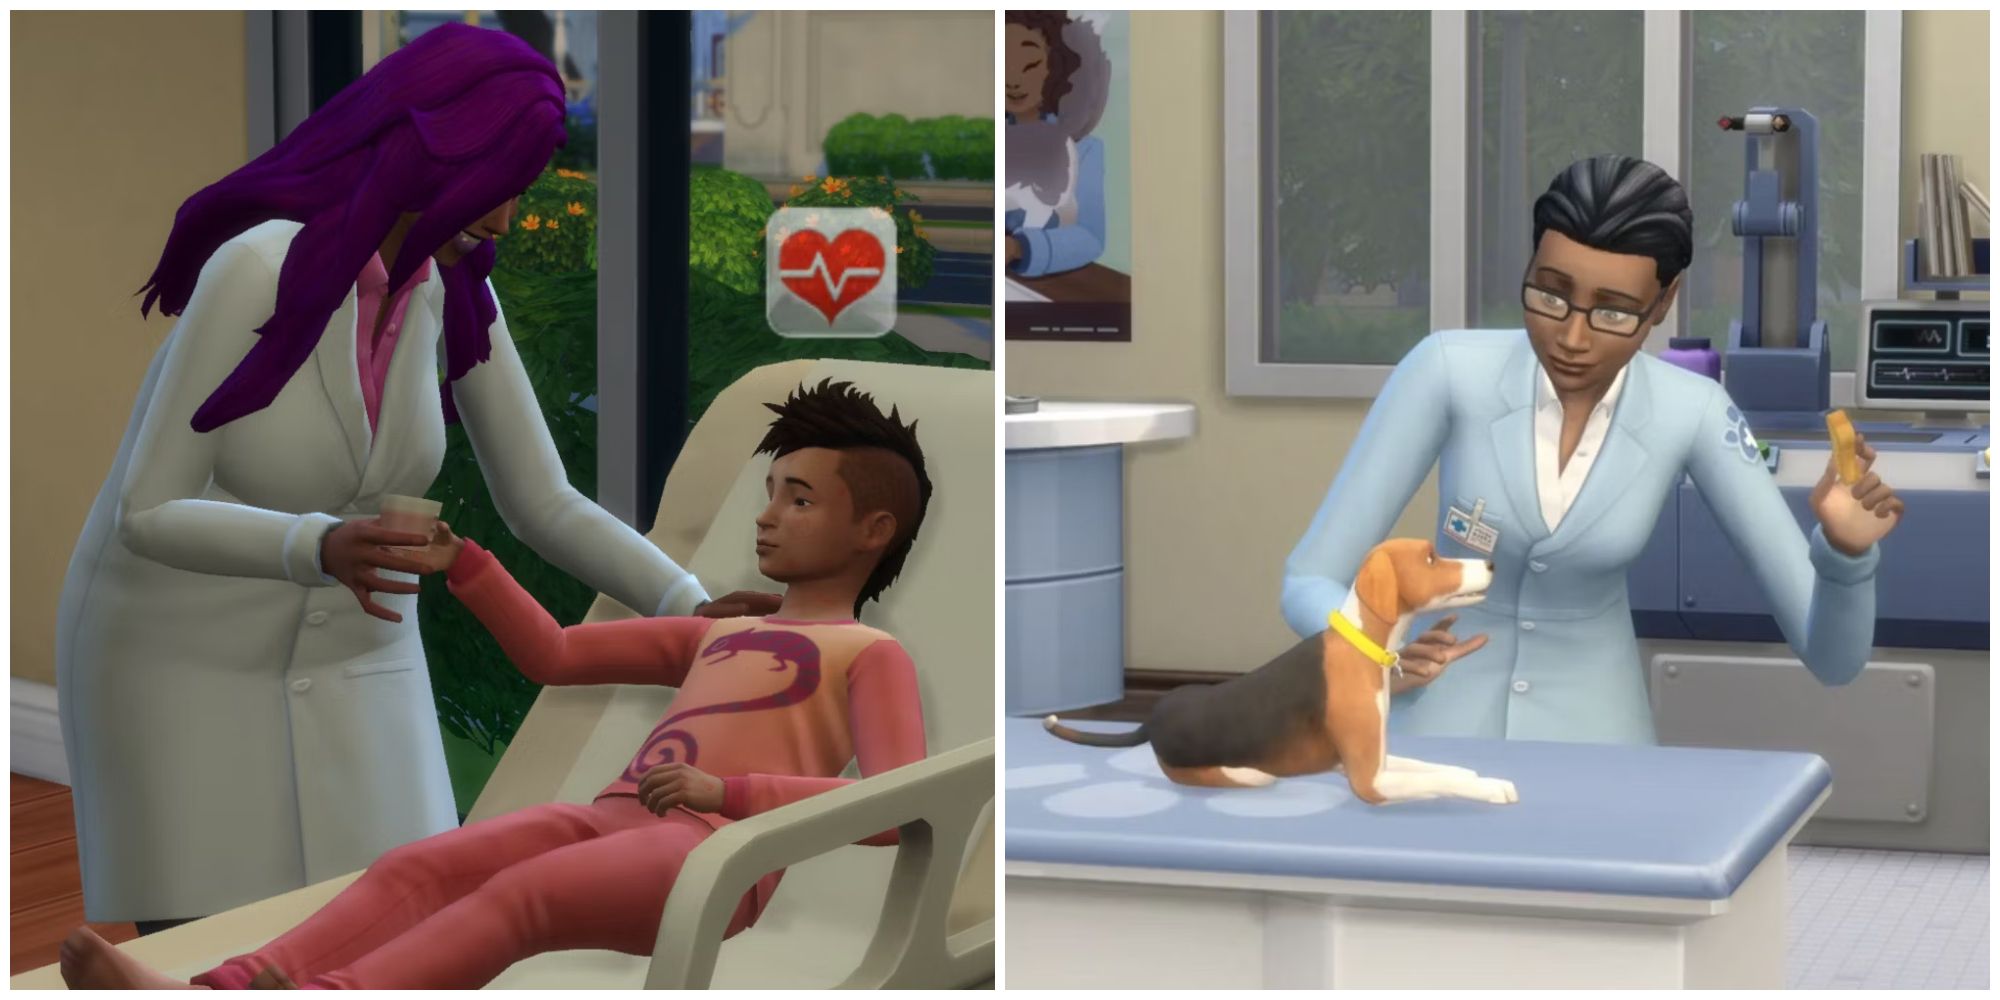 Players can go to work as a doctor or vet in The Sims 4